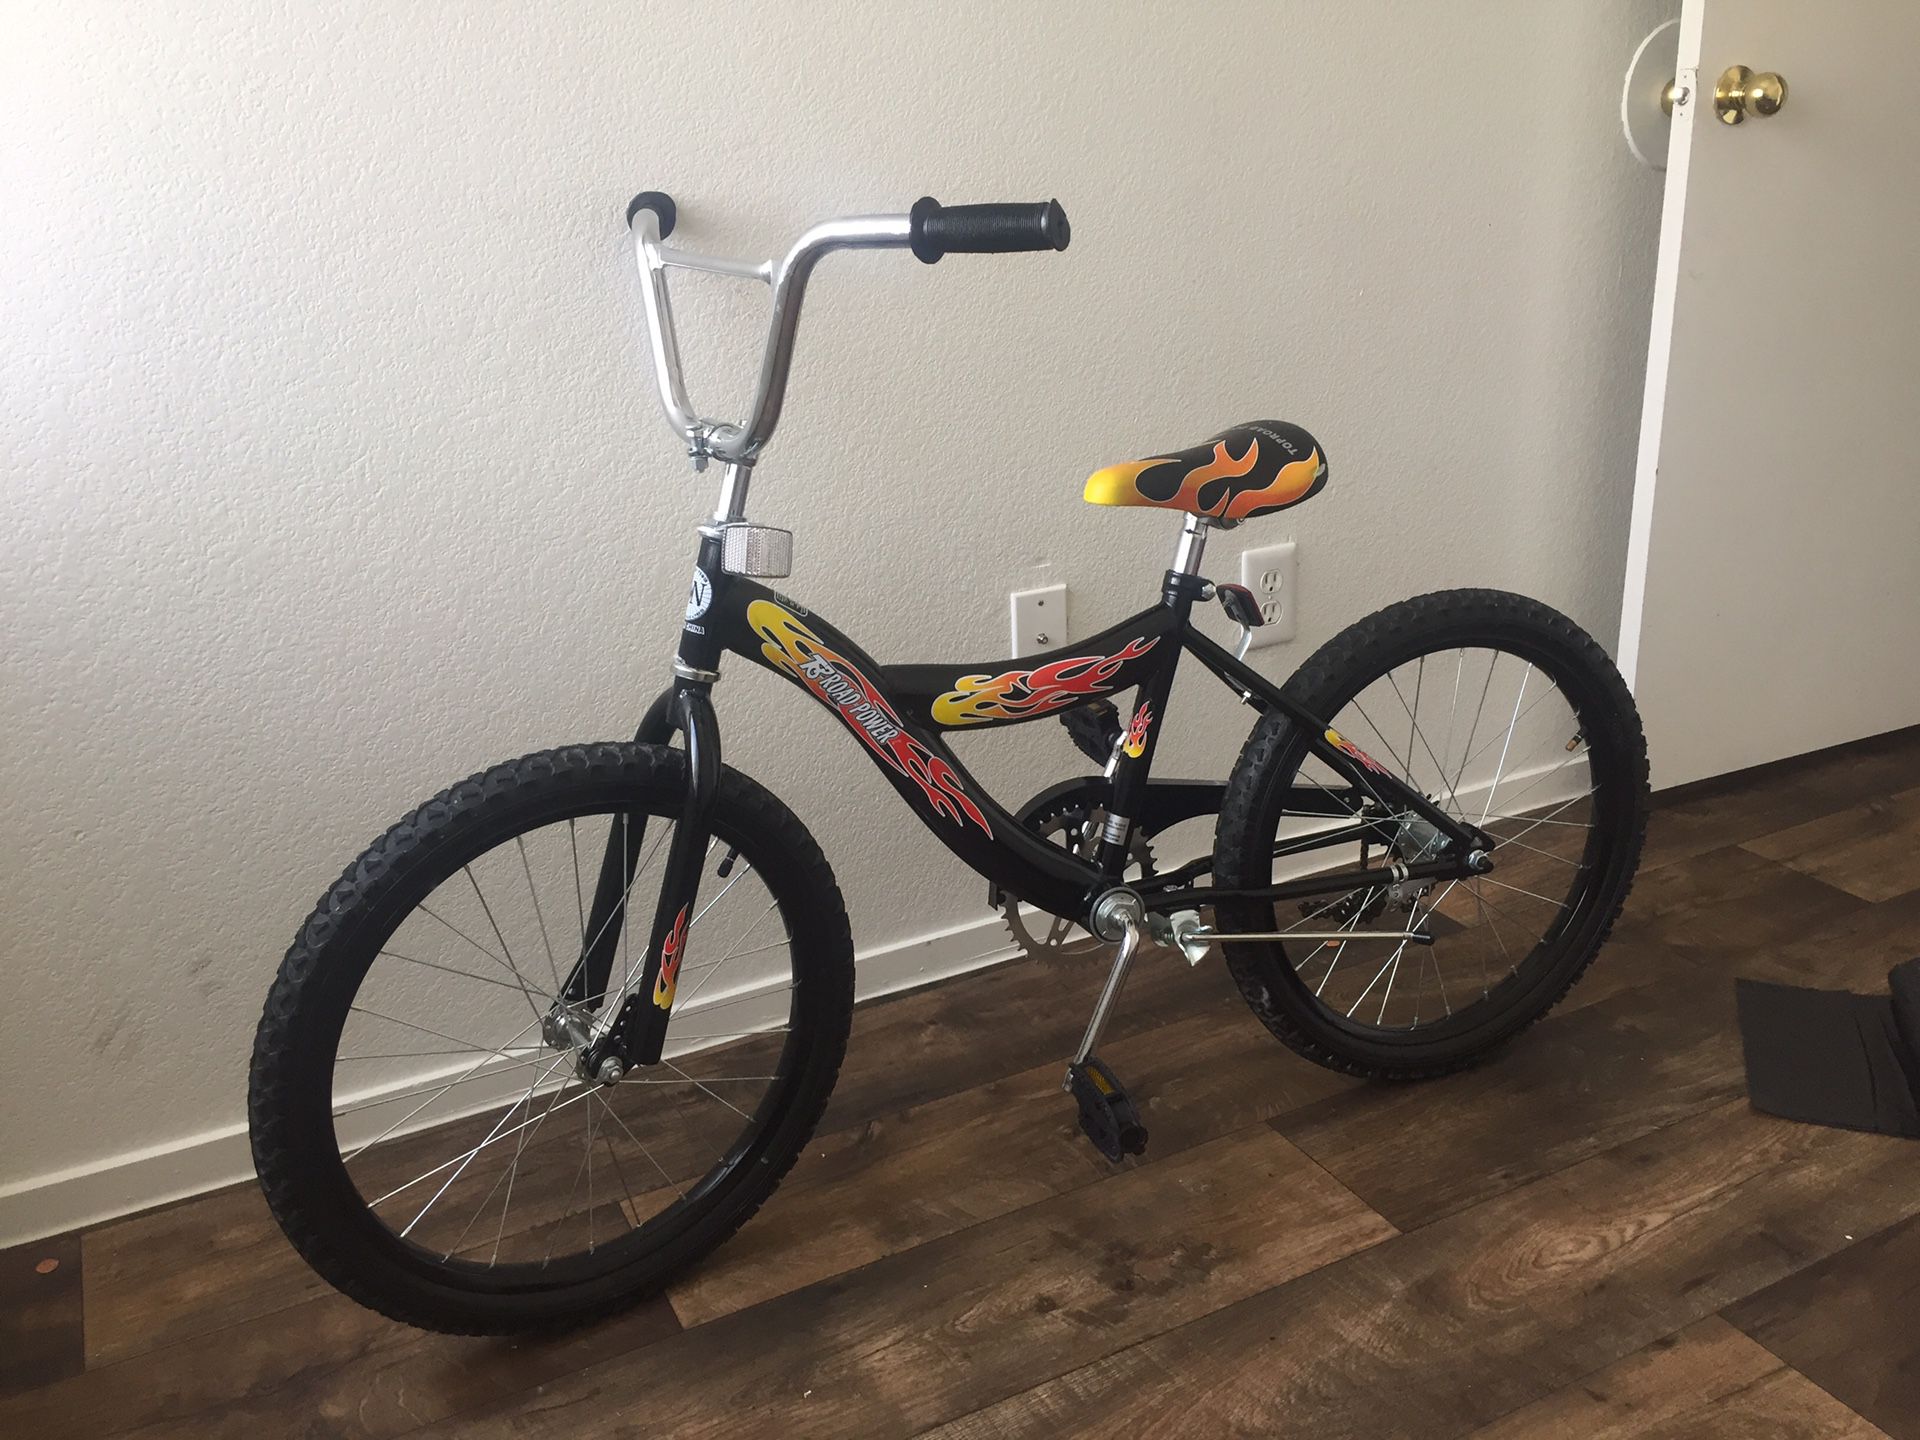 NEW BIKE!! For kids 10yrs old and up.